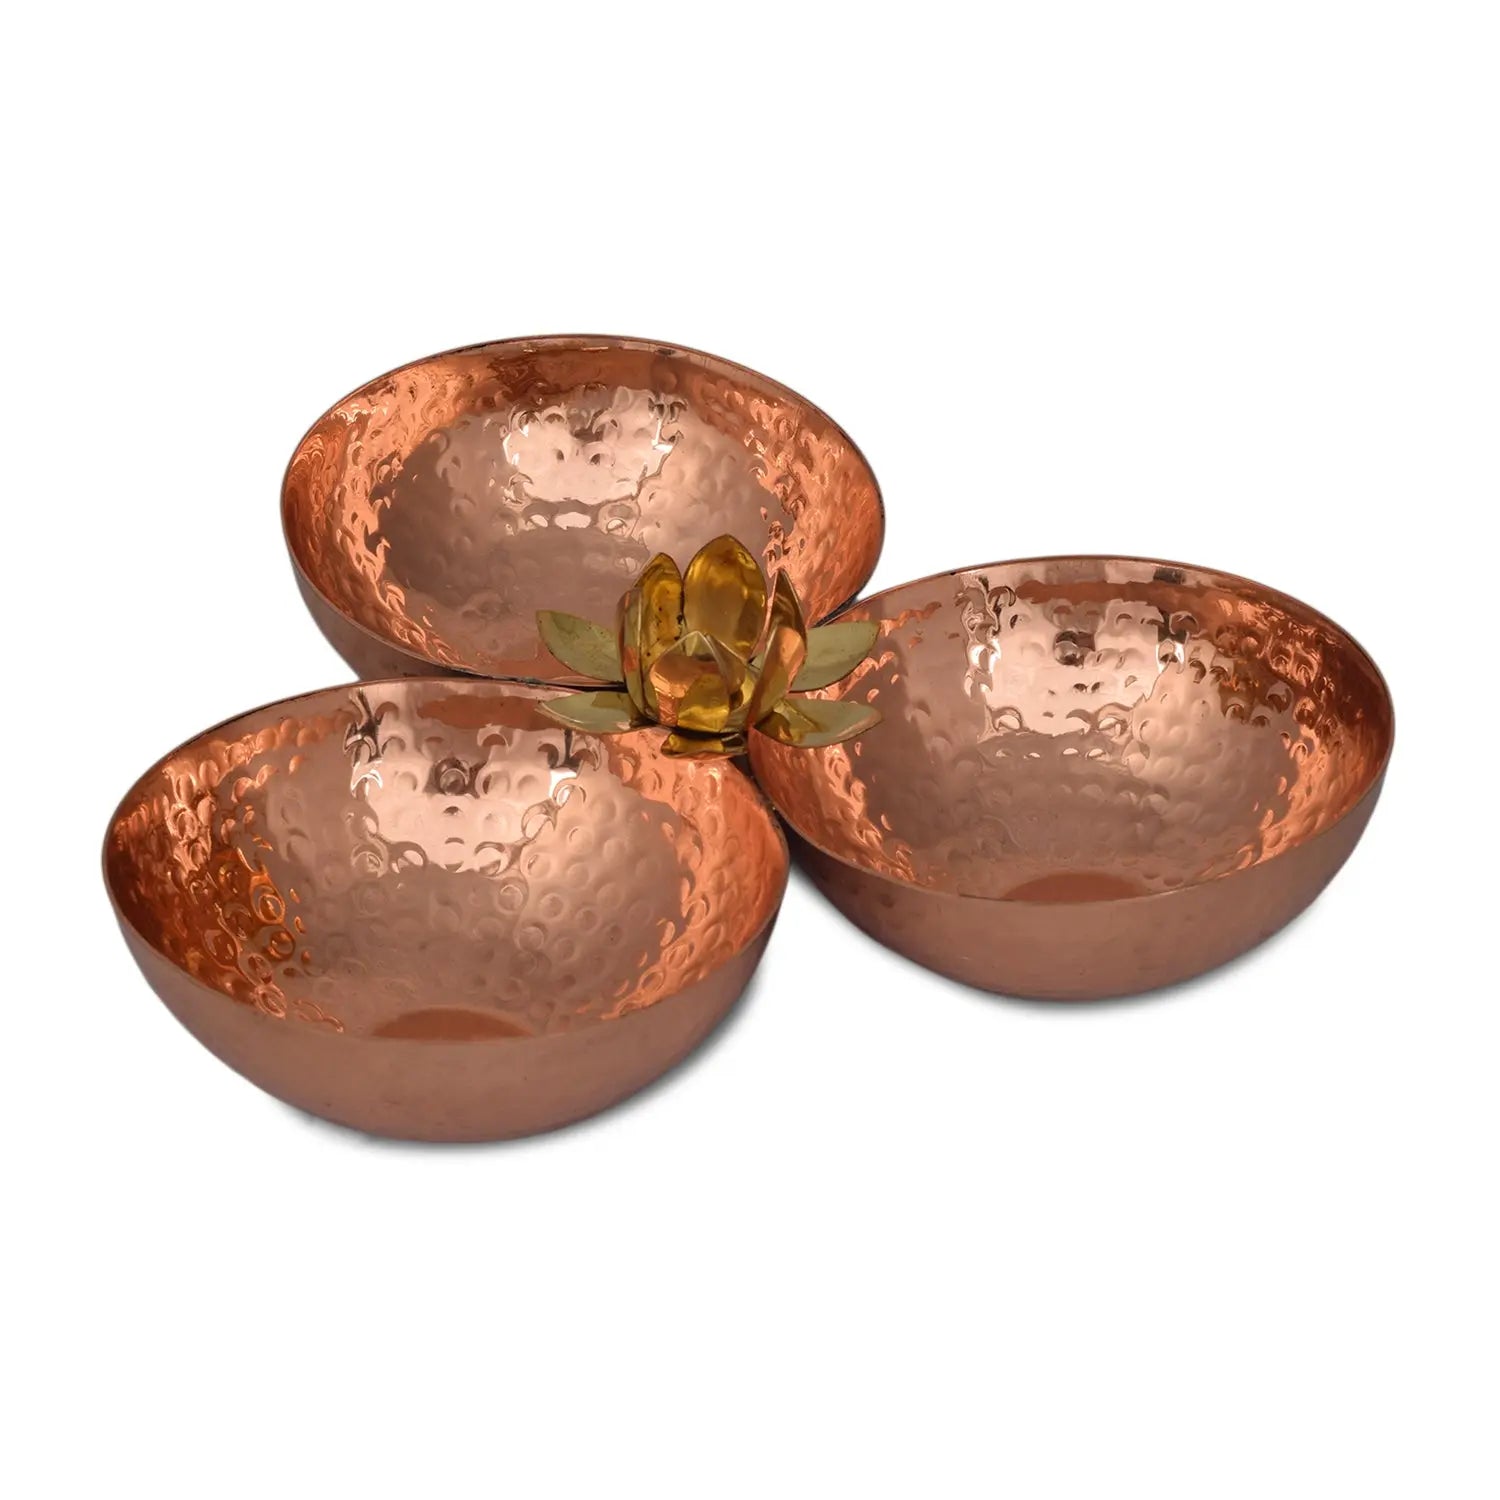 Crockery Wala And Company Pure Copper Hammered Mukhwas Tray 3 Containers Mukhwas Serving Tray For Restaurants & Home - CROCKERY WALA AND COMPANY 